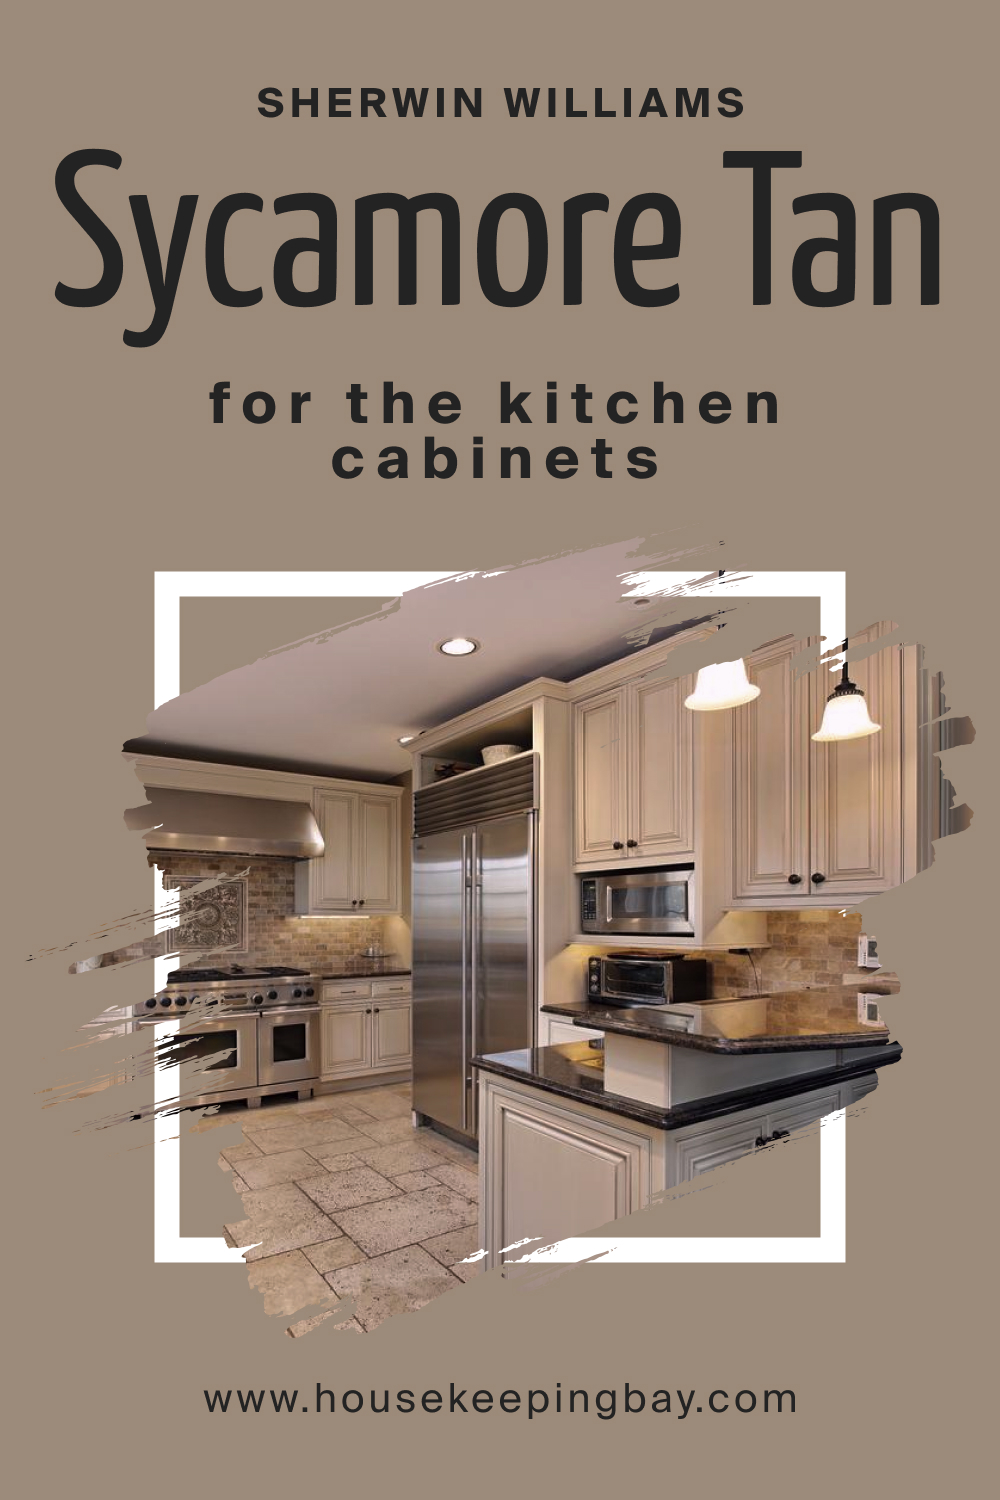 Sherwin Williams. SW 2855 Sycamore Tan For the Kitchen Cabinets